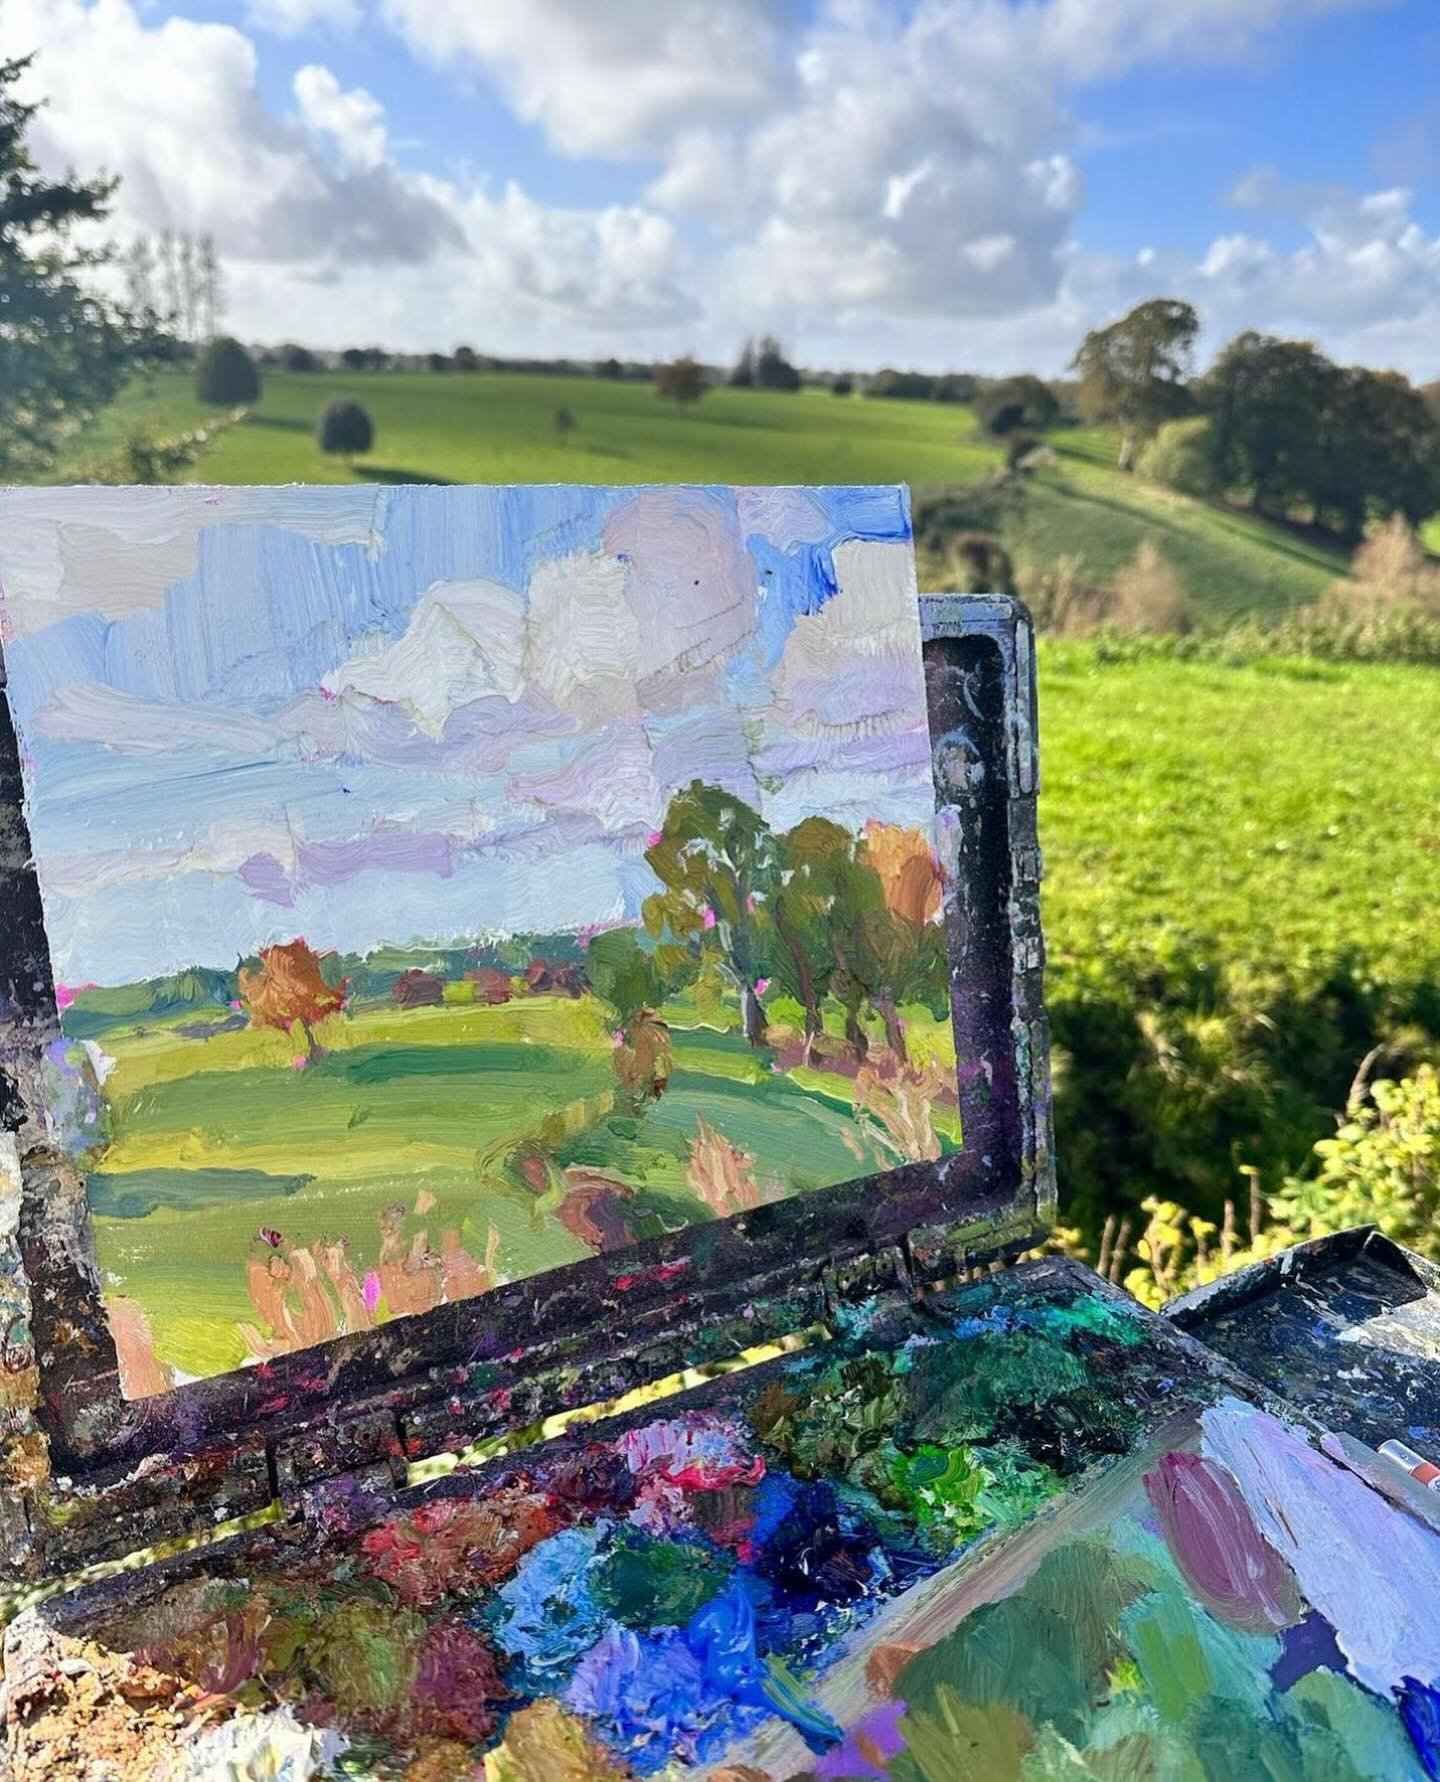 A day of big skies 💙 

I&rsquo;m really excited to be teaching some landscape-painting workshops and to meet some of you for a fun day painting outside. The June workshop is now sold out but I still have a few spaces left for 25th May. 

You can fin